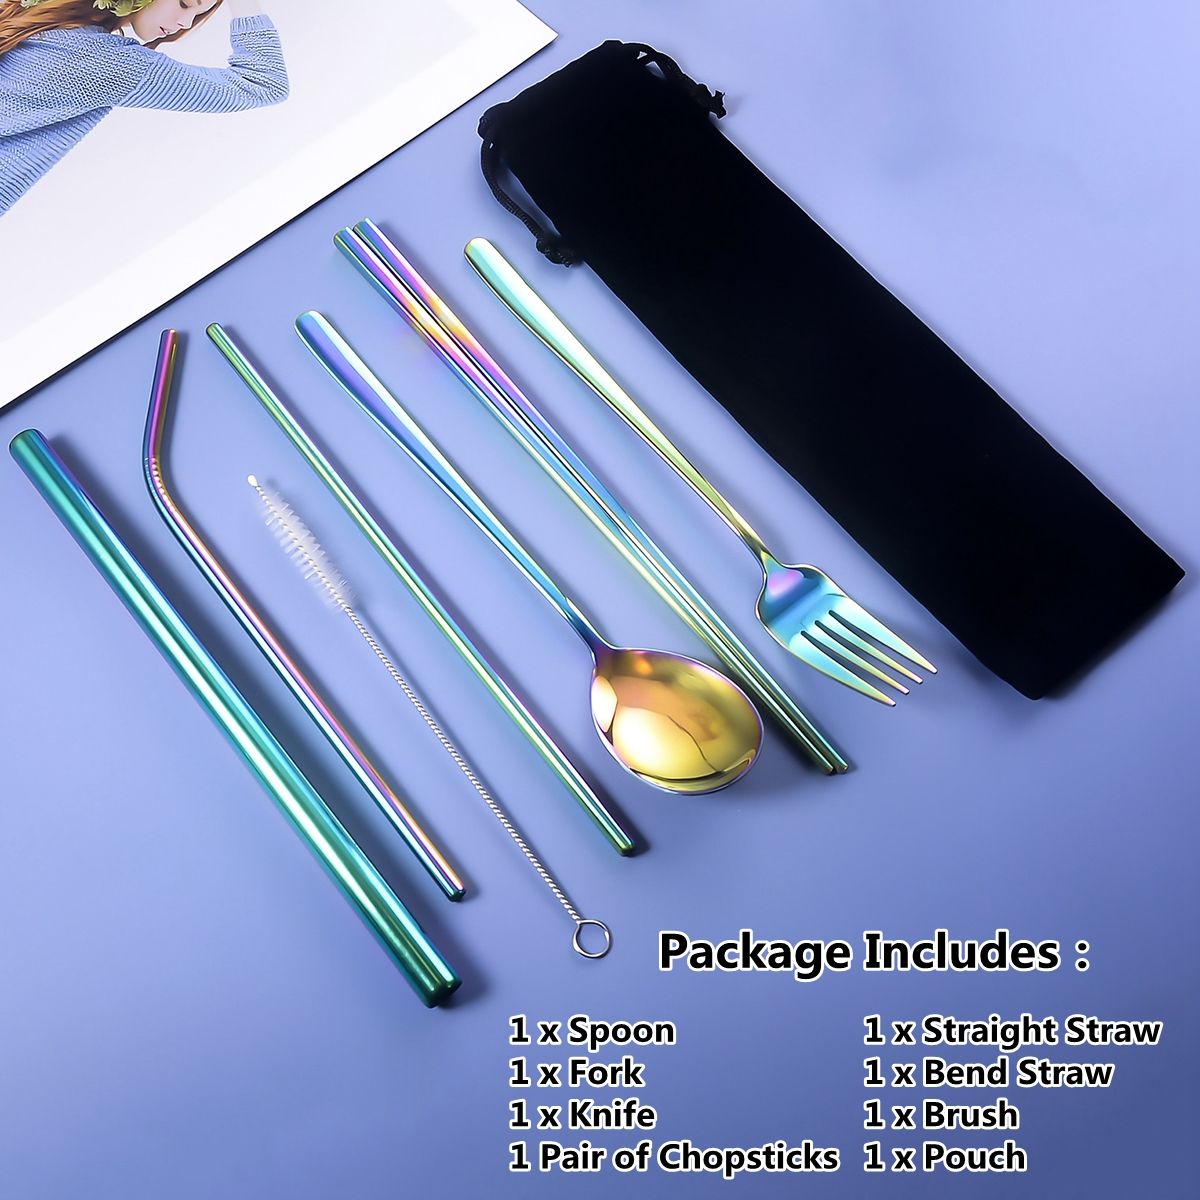 8Pcs-Titanium-Plated-304-Stainless-Steel-Cutlery-Set-Knife-Fork-Spoon-Chopsticks-And-Straw-Combinati-1716199